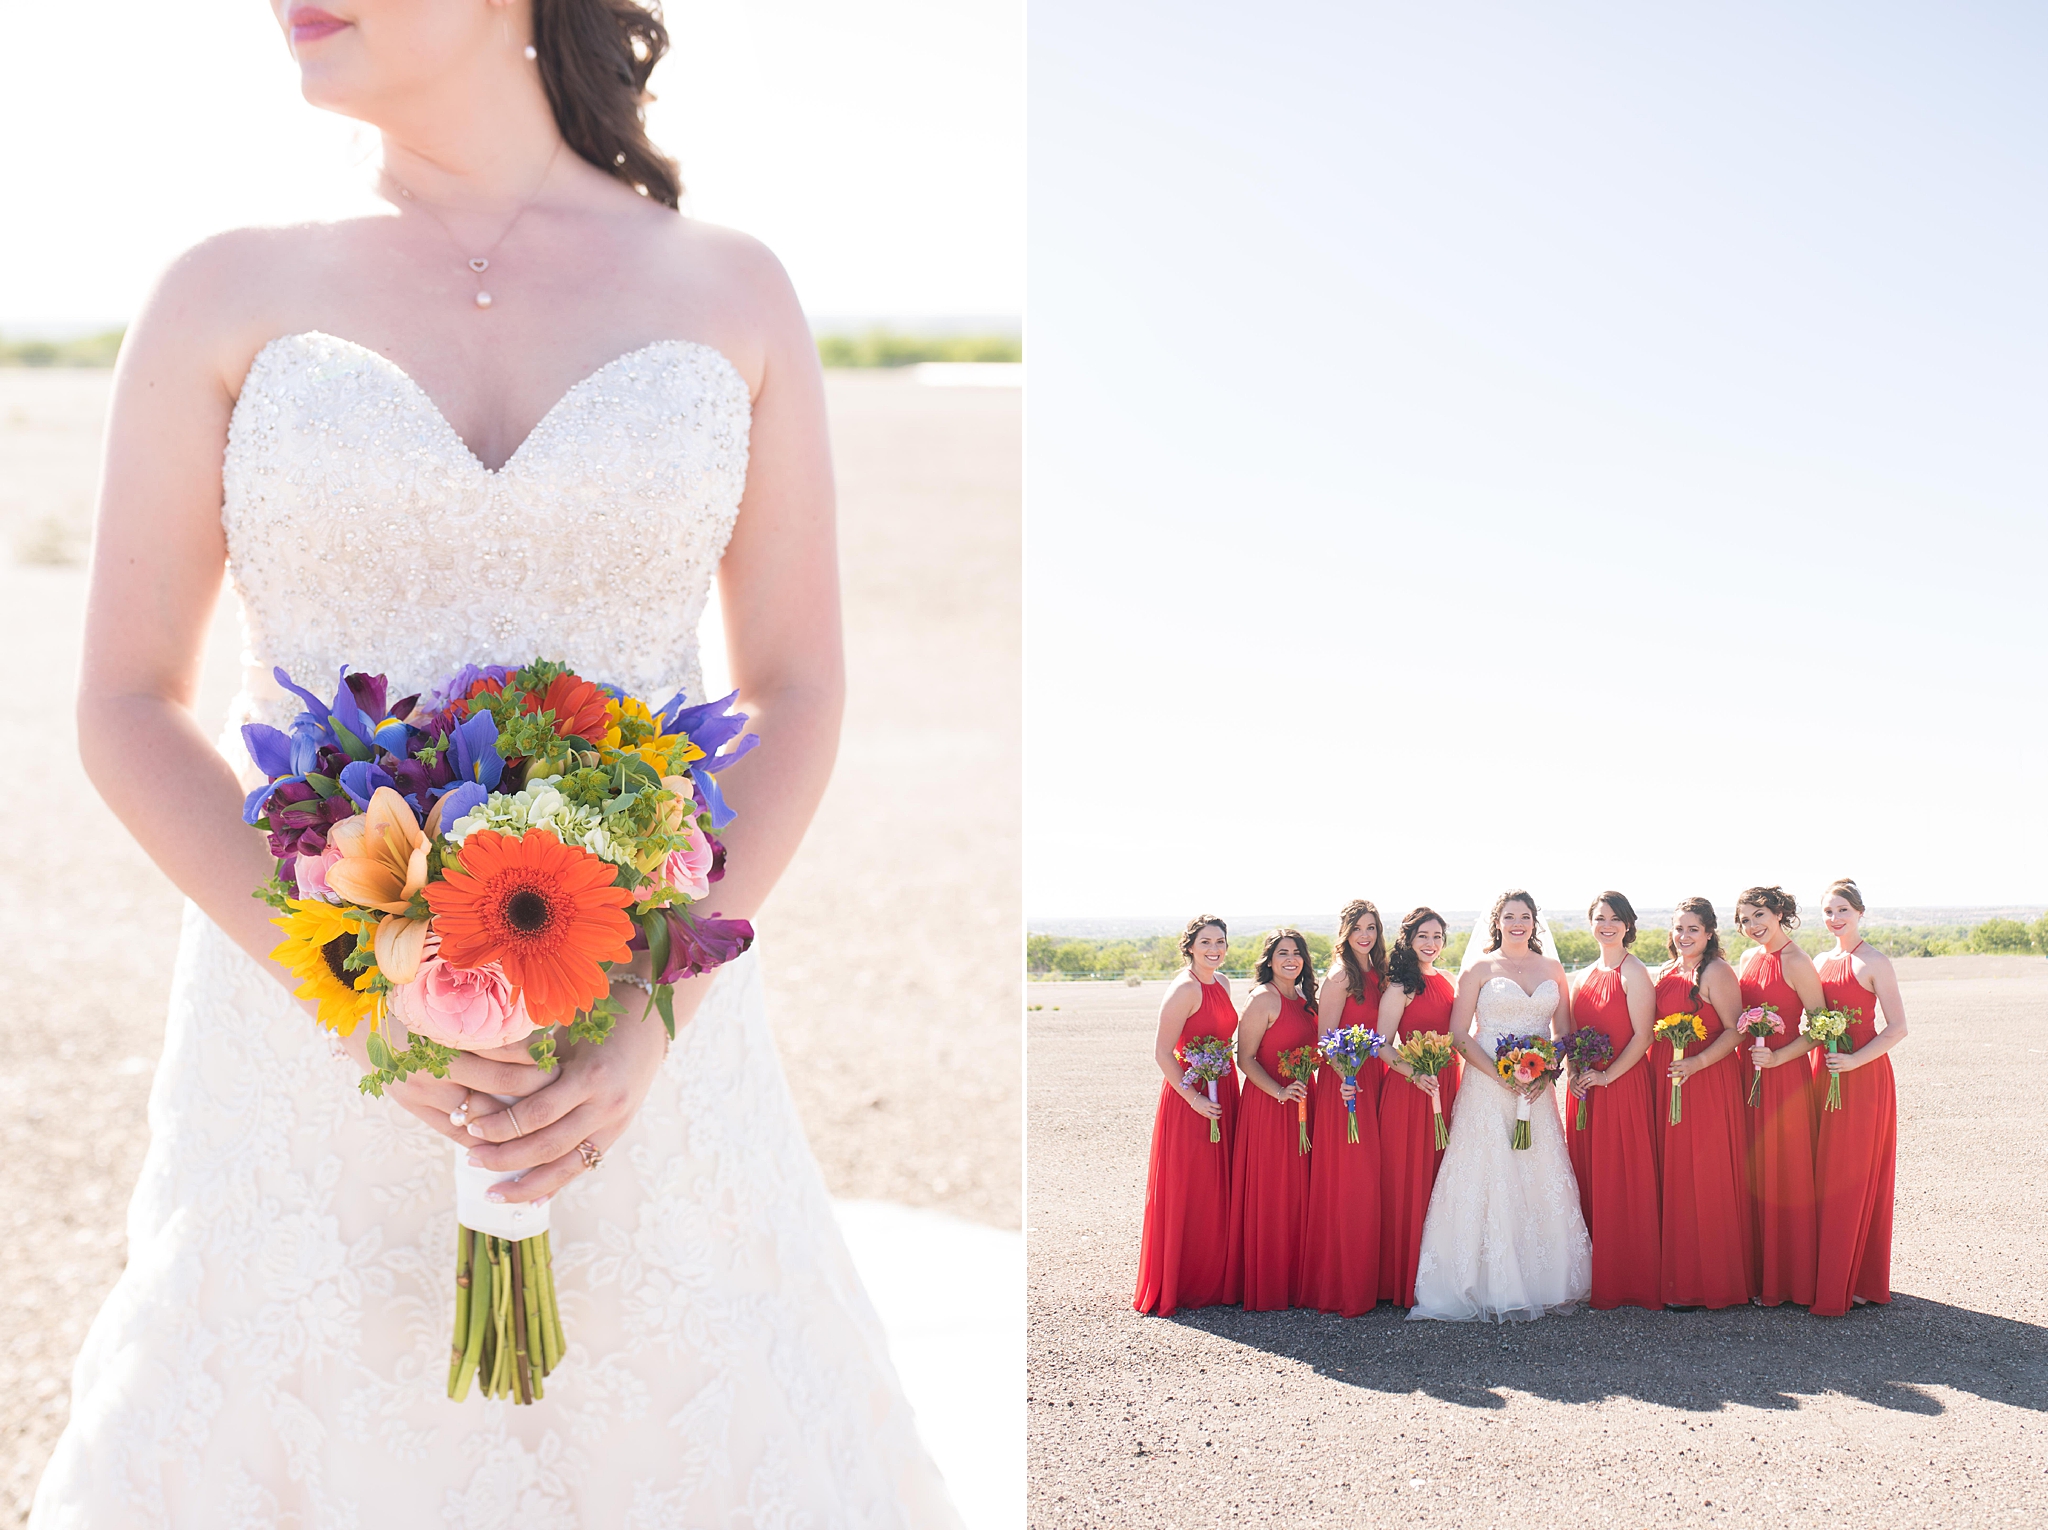 Balloon fiesta wedding with large wedding party in albuquerque new mexico.  Dress by Bridal Elegance by Darlene and jewelry by enchanted jewelers.  Albuquerque Wedding Photographer.